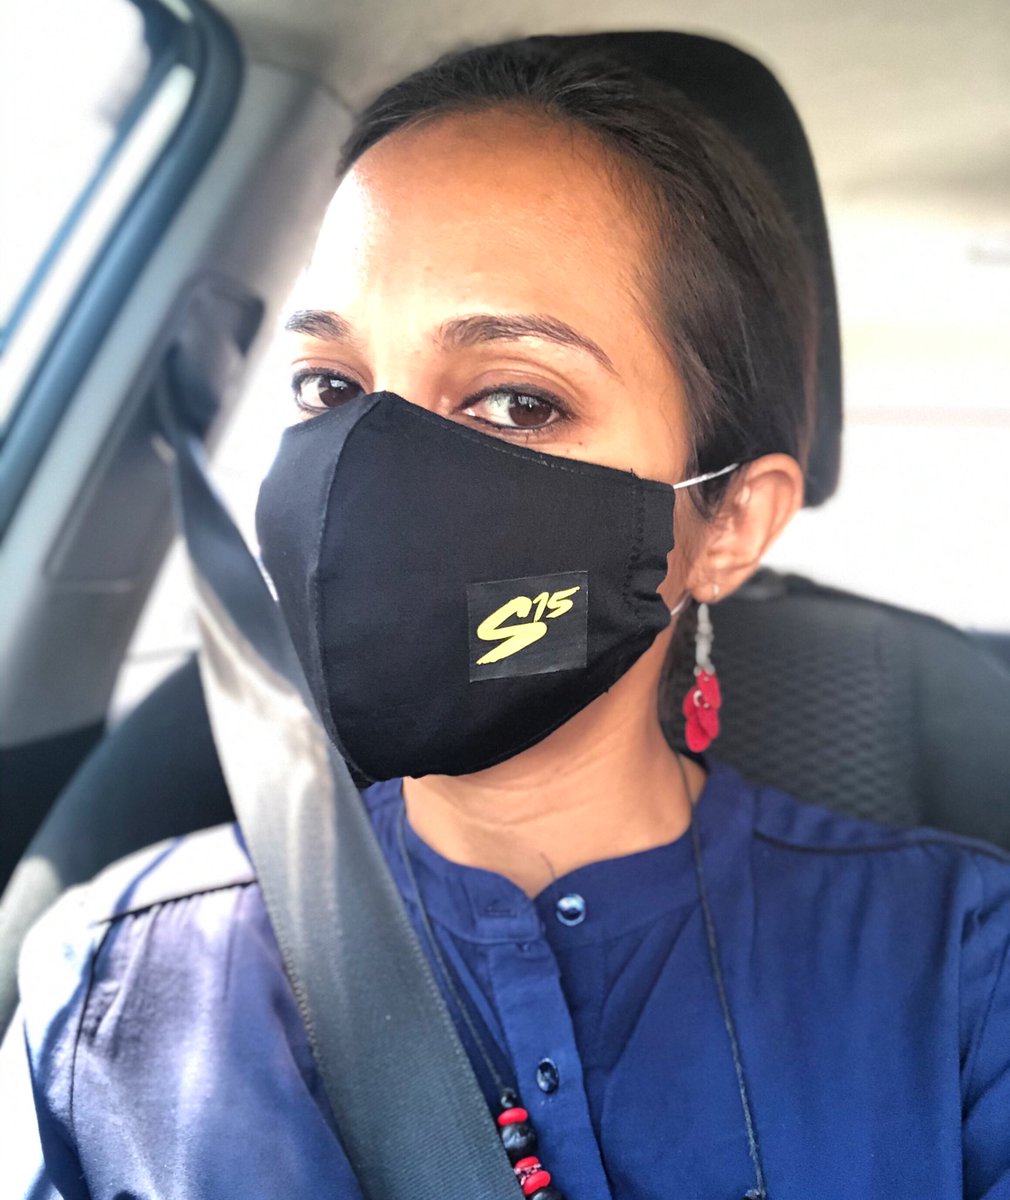 I'm joining World Health Organization (WHO) in the #WearAMask challenge! Masks are one of the important tools to keep ourselves, our loved ones and communities safe from #COVID19. 

@PandavRajesh @WHOTimorLeste @WHO